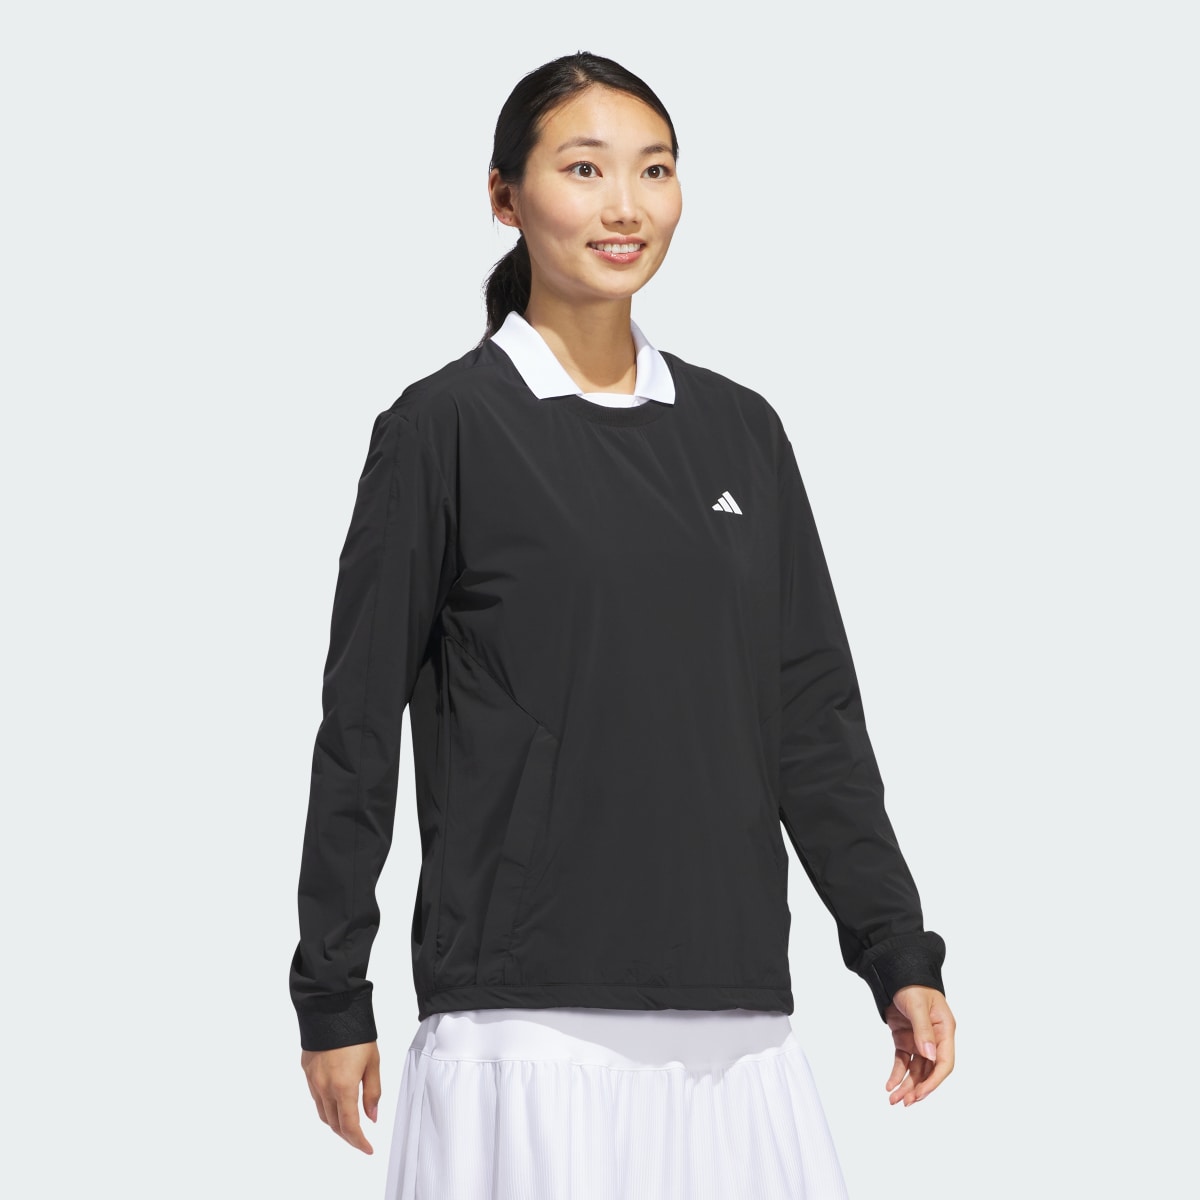 Adidas Ultimate365 Tour WIND.RDY Pullover Sweatshirt. 4